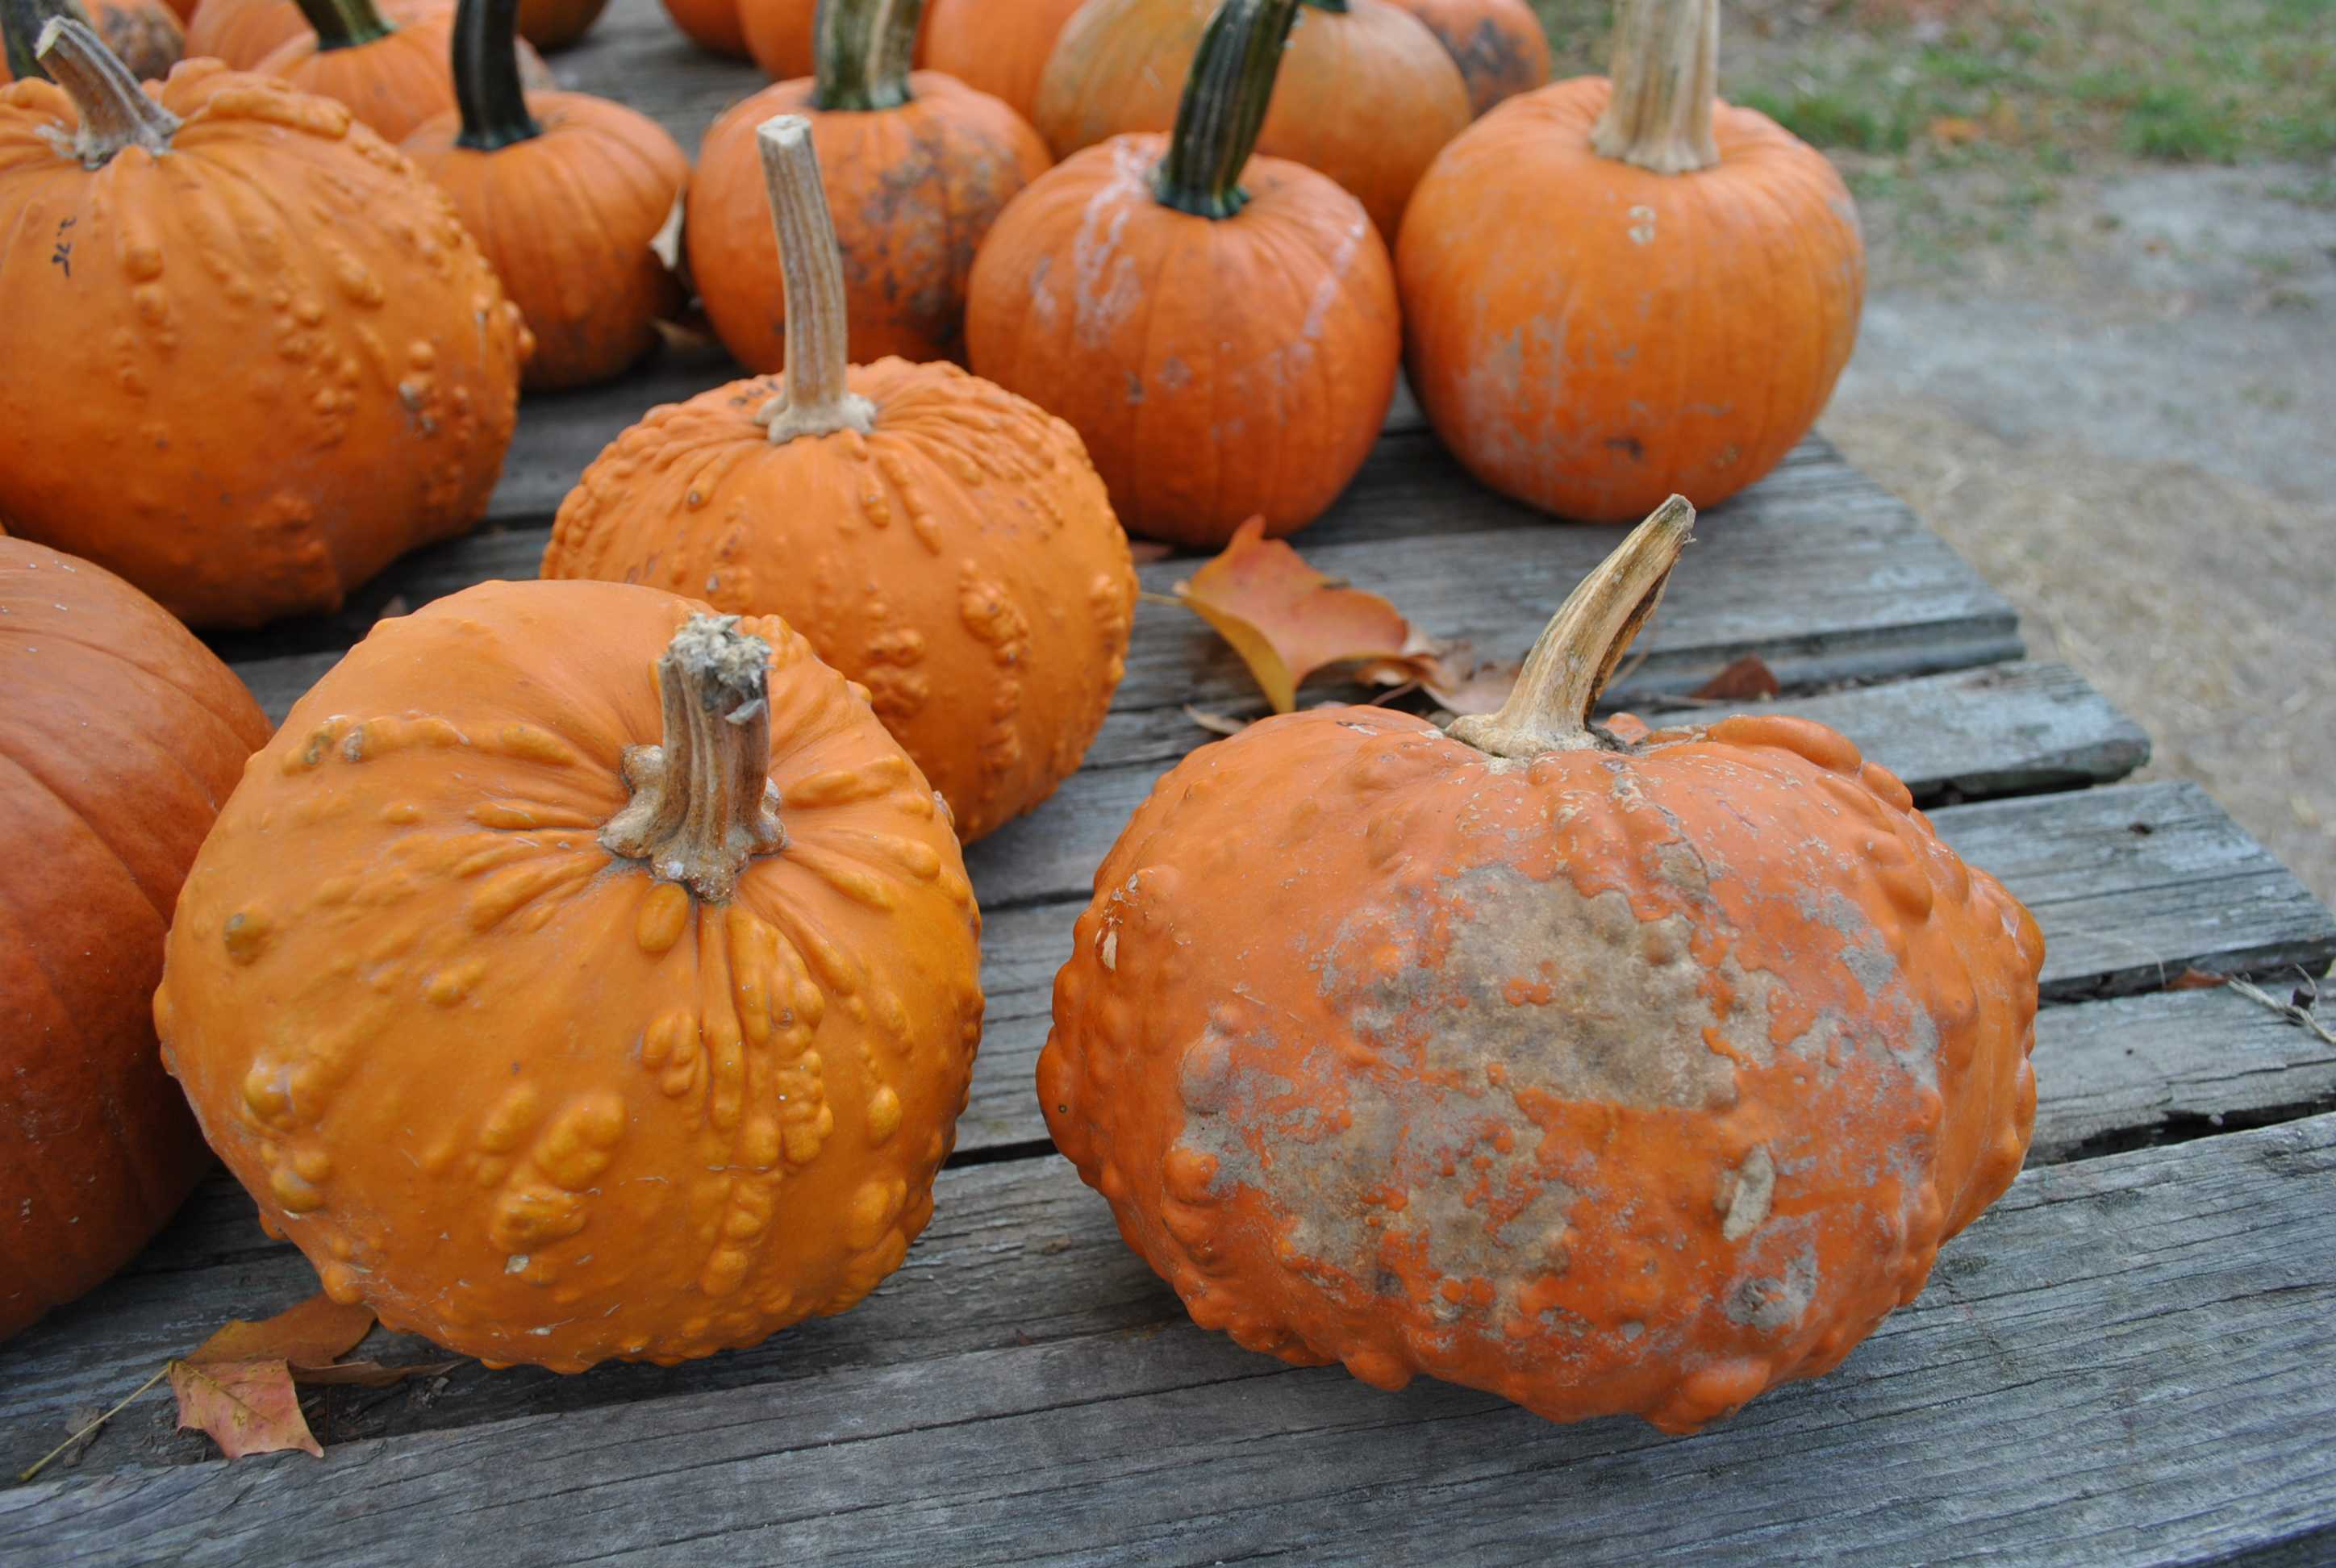 Halloween is fast approaching and it is last minute pumpkin shopping time!  Be sure to get your pumpkin from a local grower like the one above in order to keep green and support local Saint Louisans.